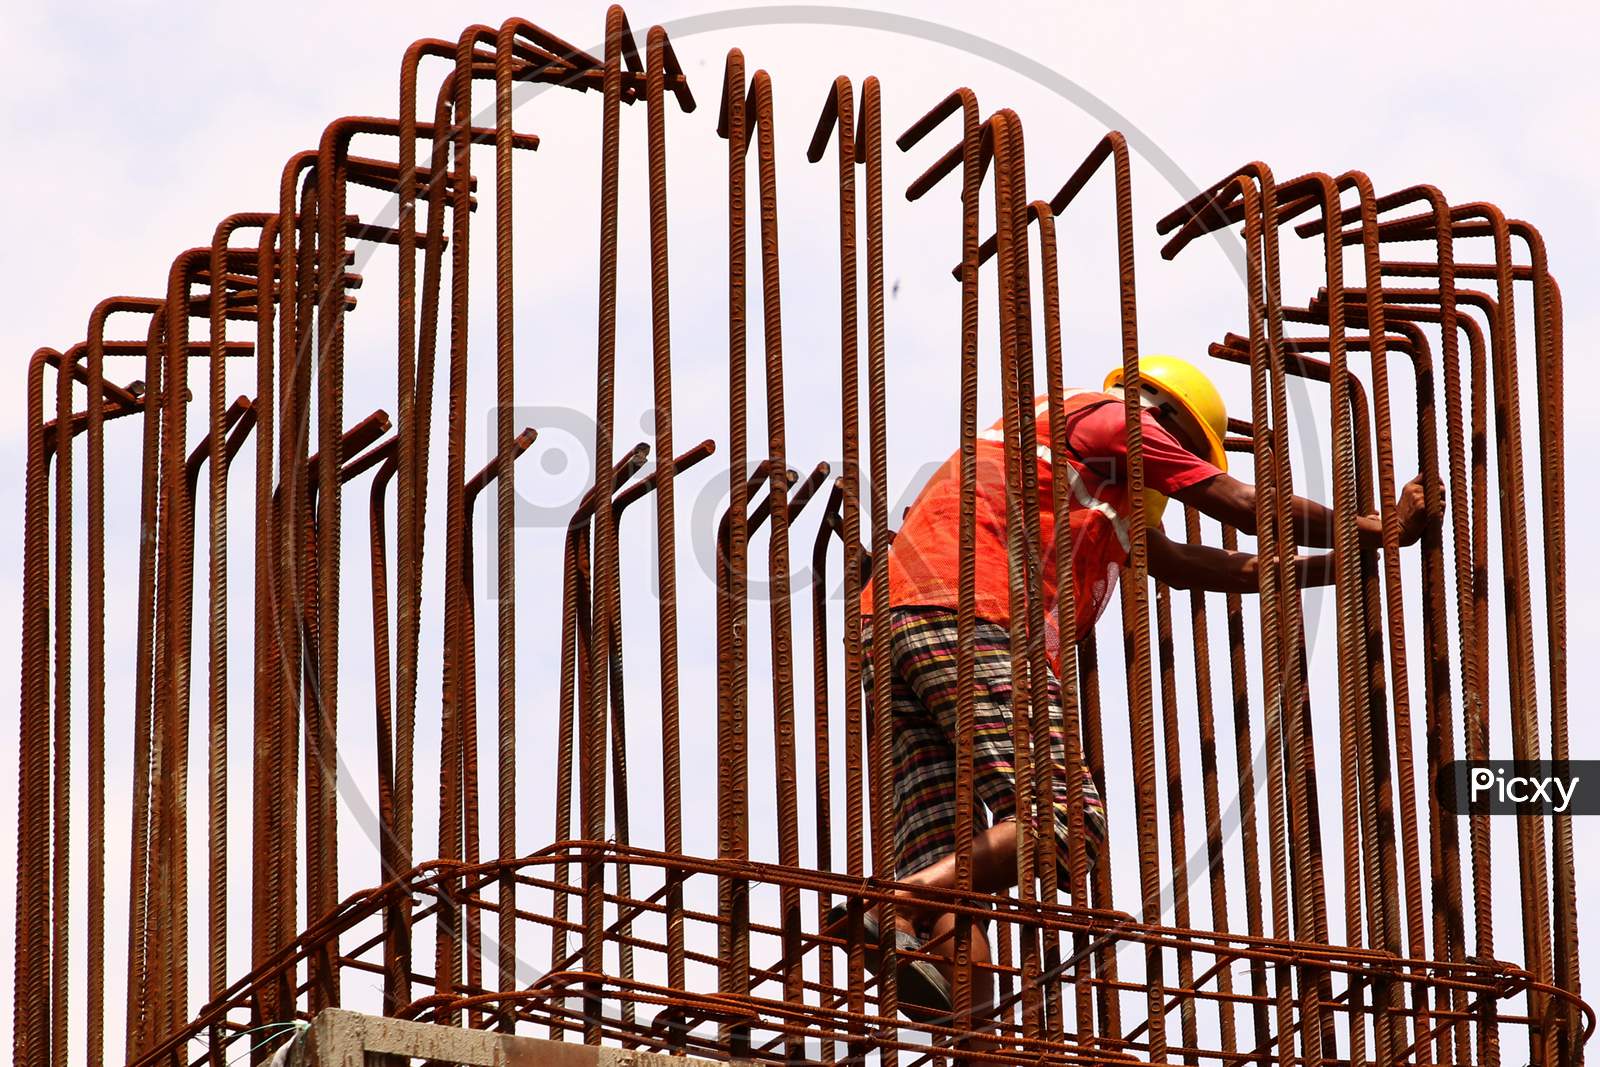 Daily Labourer Work On A Construction Site During A Government-Imposed Nationwide Lockdown As A Preventive Measure Against The Covid-19 Coronavirus, In Ajmer, Rajasthan, India On May 13, 2020.